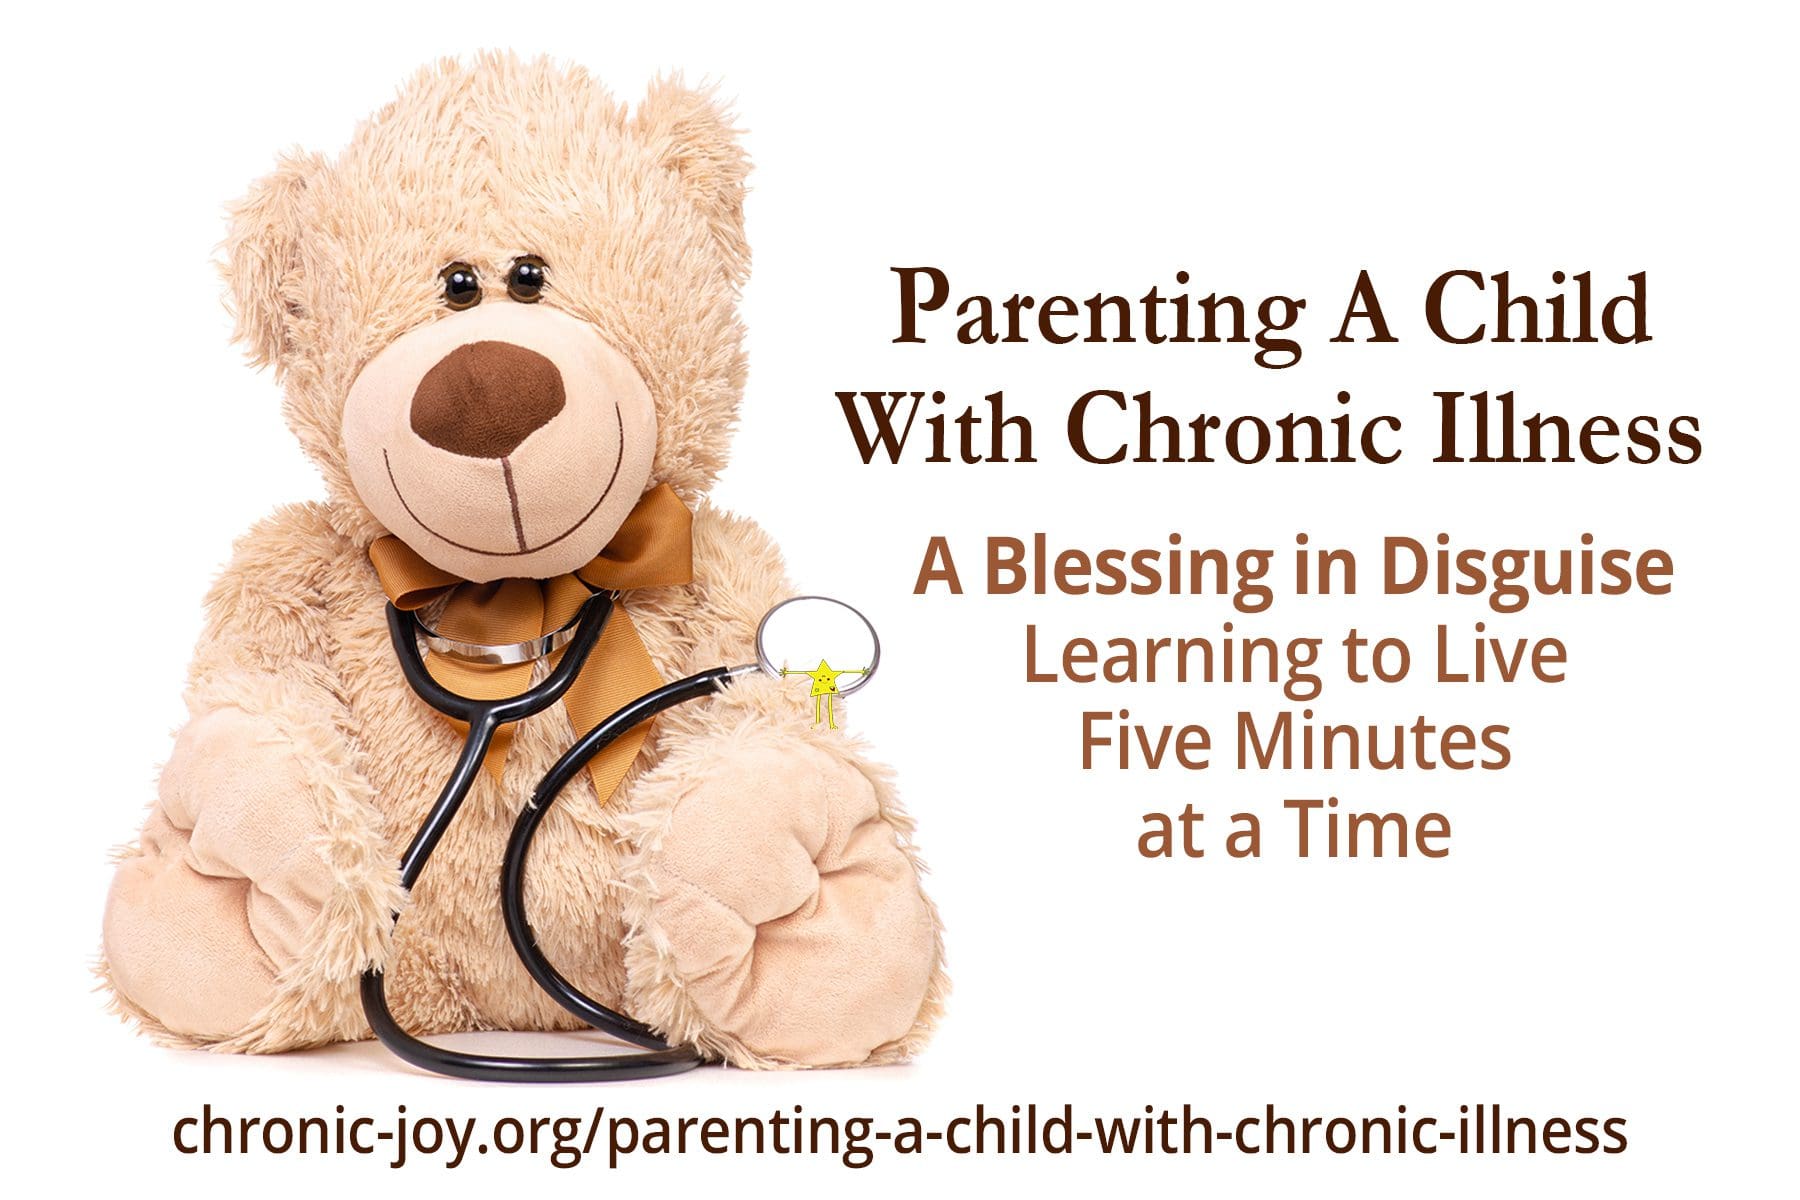 Parenting a Child with Chronic Illness